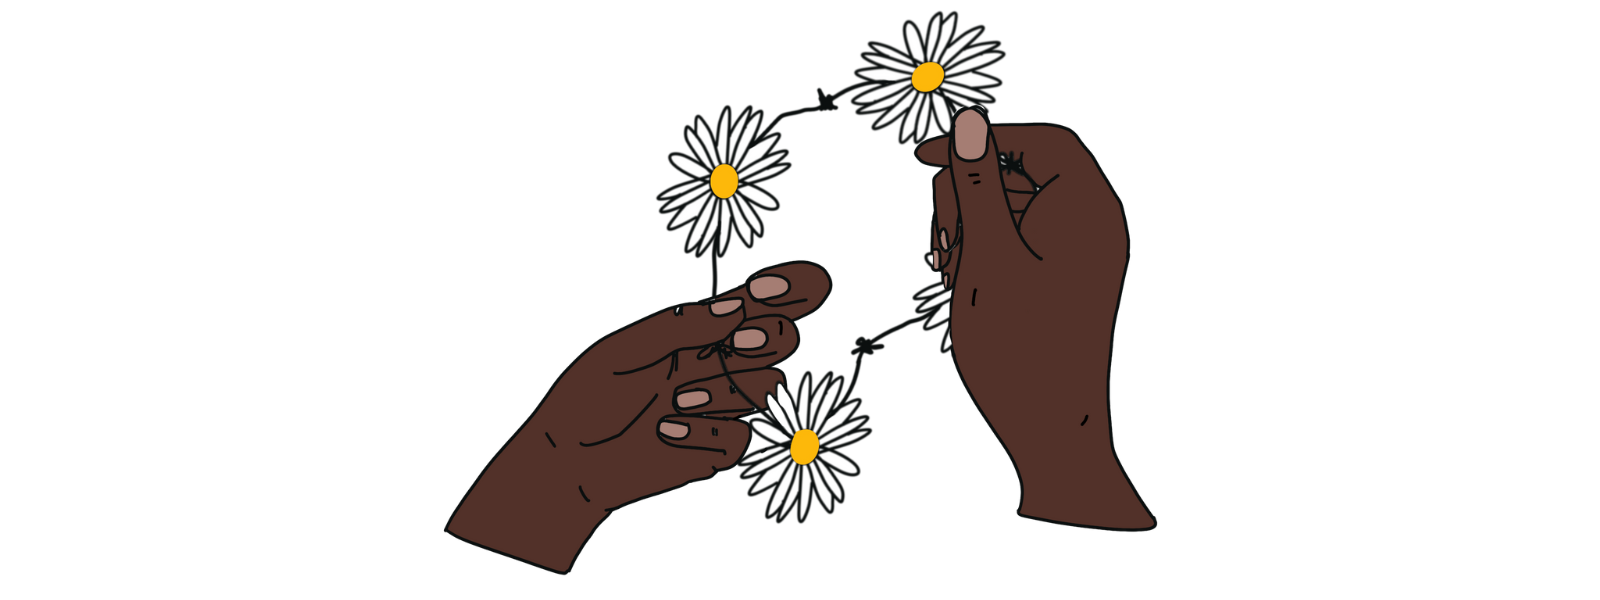 Illustration of hands holding a daisy chain.